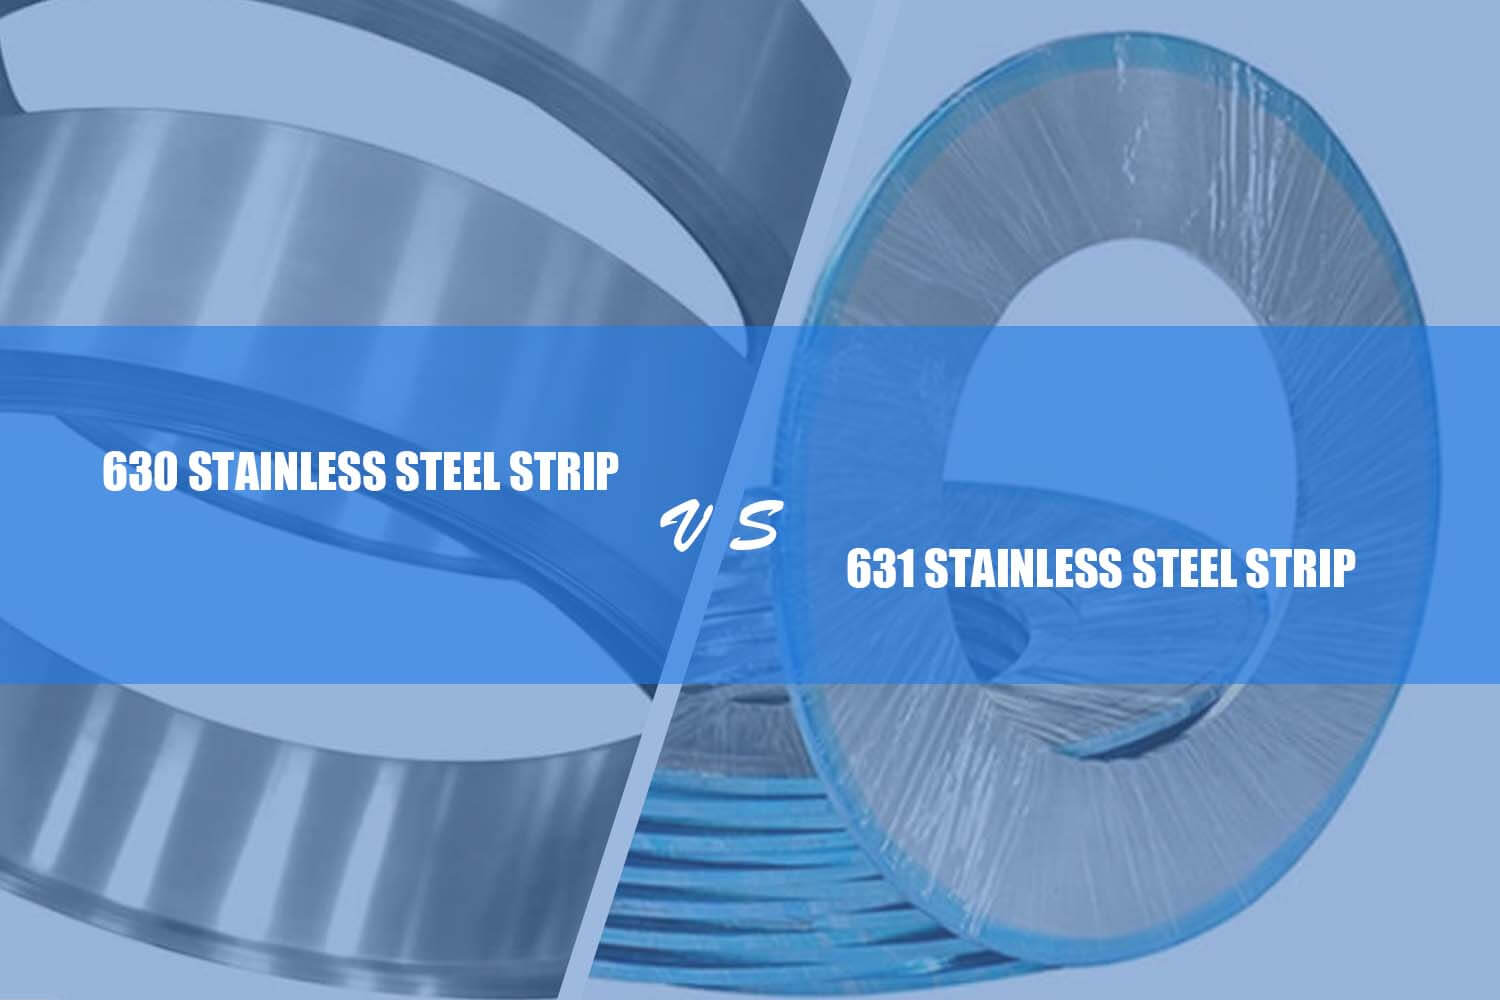 difference between 630 stainless steel strip and 631 stainless steel strip